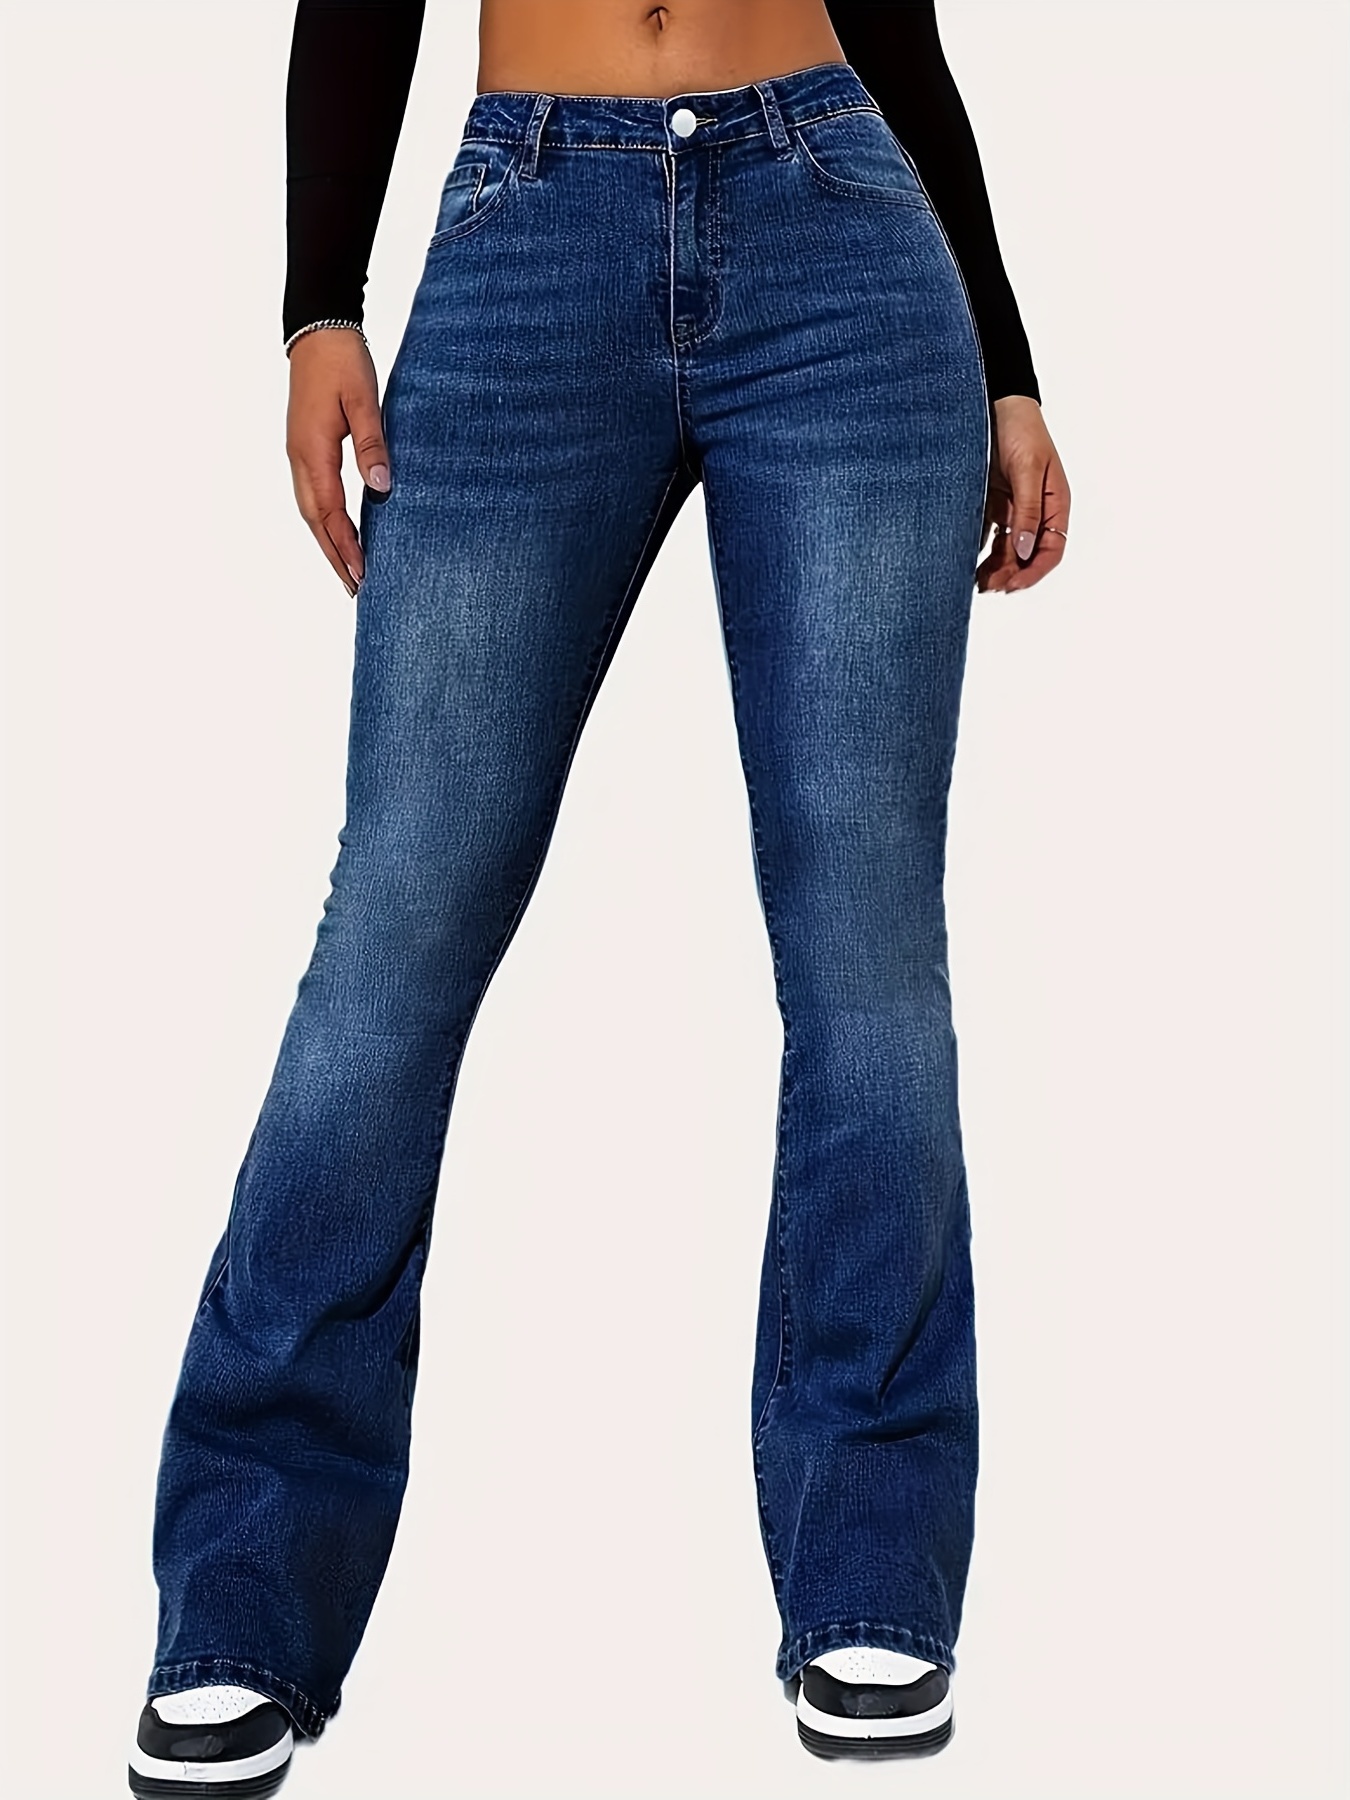 Dark Blue V Cut Flare Jeans, Layered Water Ripped Embossed Casual Bell  Bottom Jeans, Women's Denim Jeans & Clothing